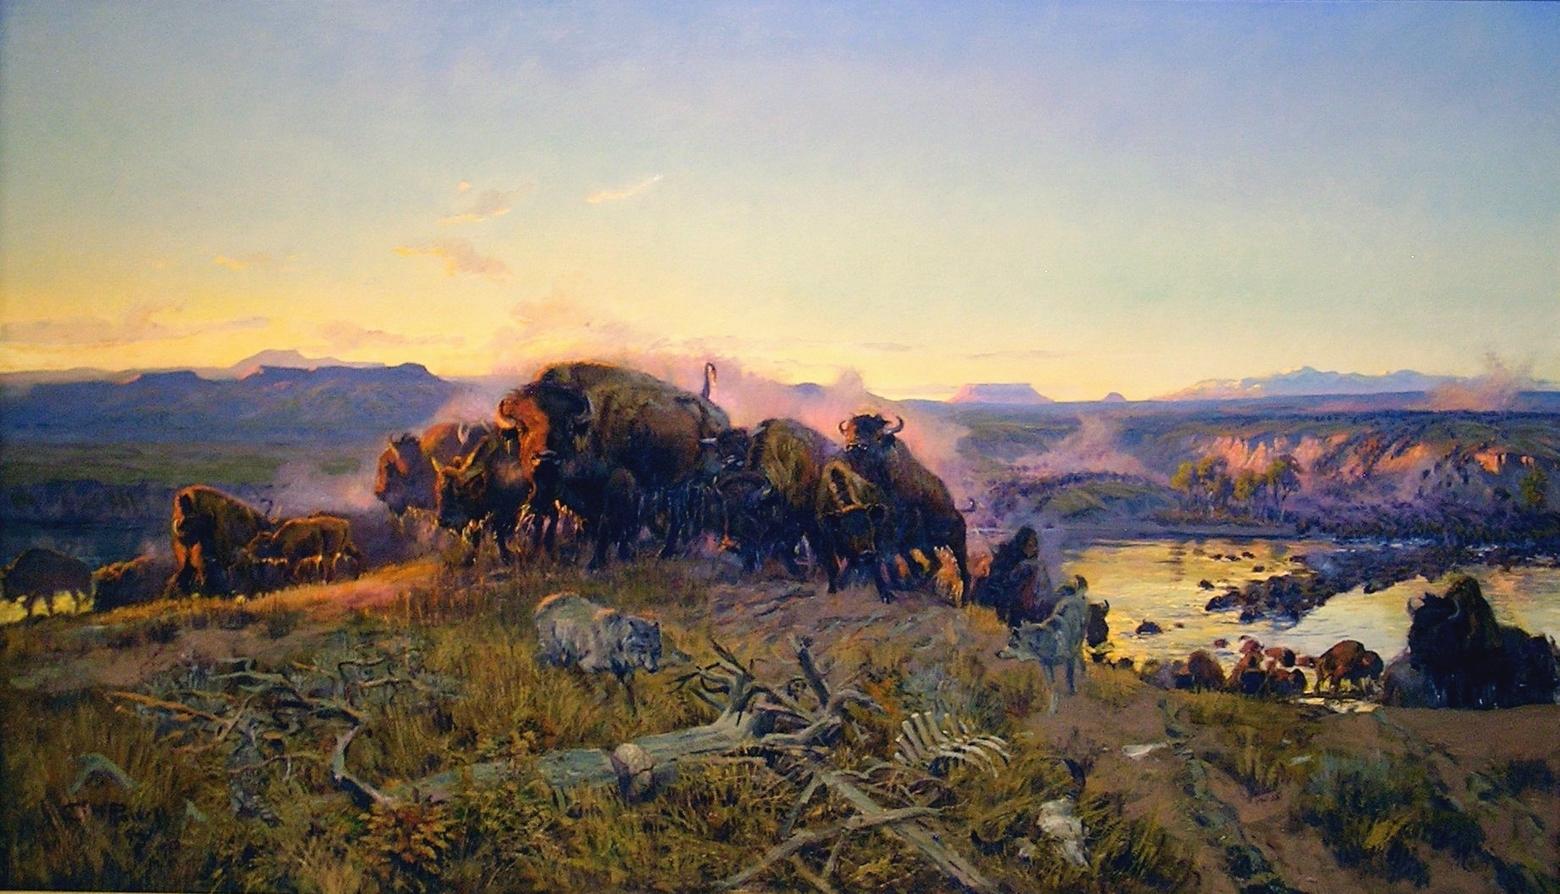 "When the Land Belonged to God," an oil painting by Charles M. Russell. Russell often reflected on the changes the marked the difference between the aboriginal West and the so-called "Old West" defined by settlers pouring into the region. Russell had an appreciation for nature. Many of his "cowboy and Indian" scenes, however, are considered passe.  This painting is part of the Montana Historical Society's permanent McKay Collection. For years this work hung in the Montana Senate.